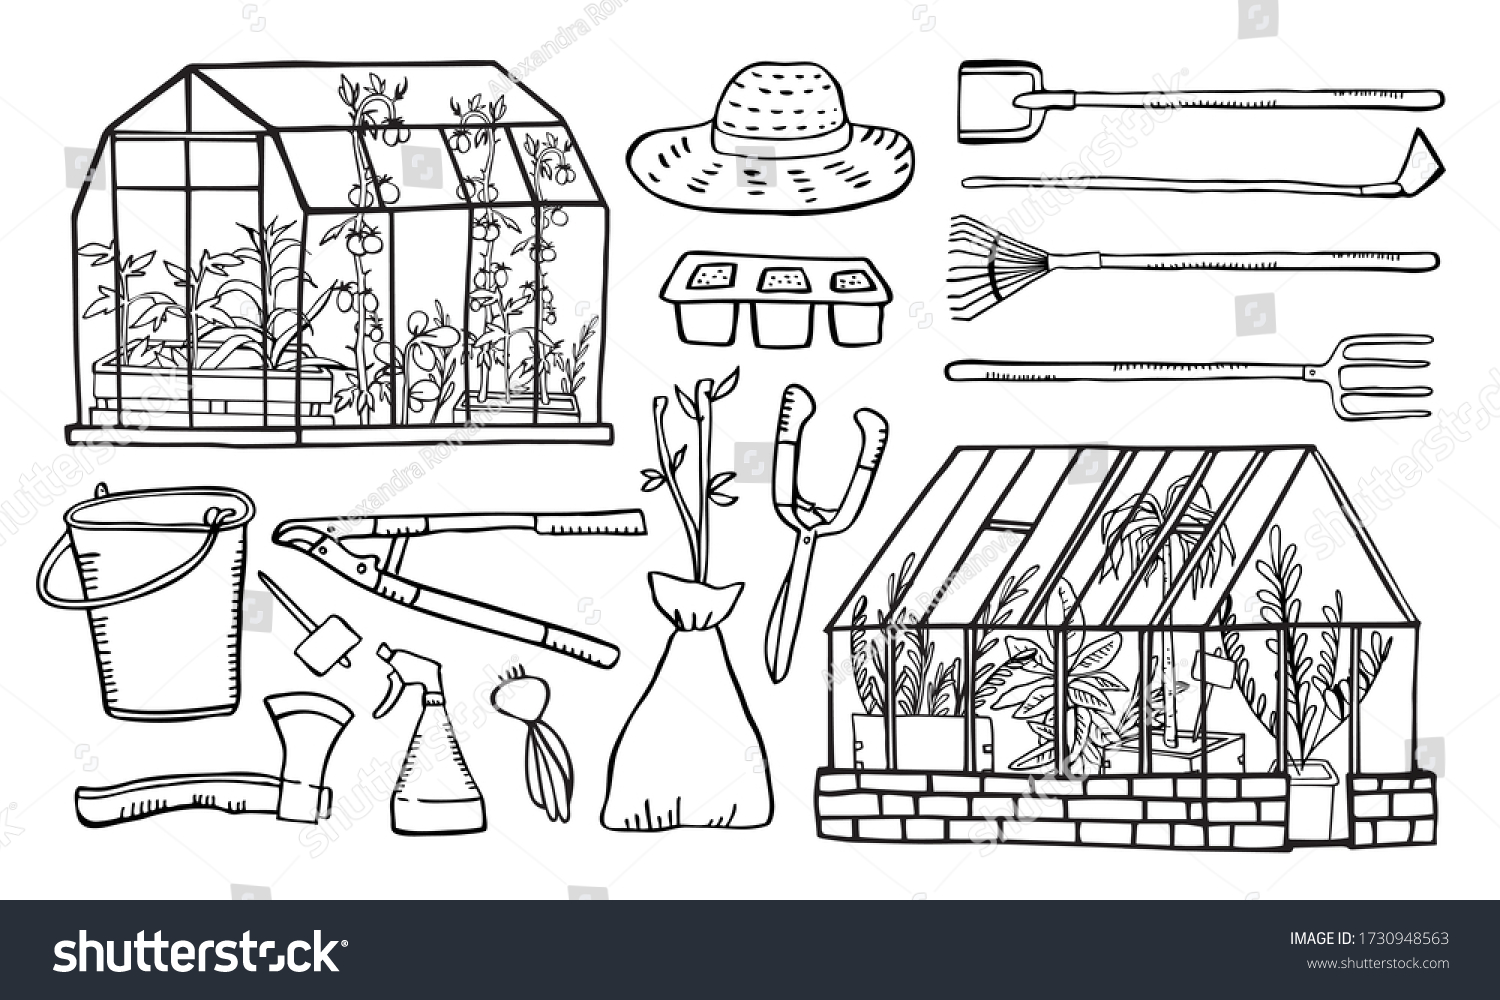 SVG of Set with two greenhouses and plants inside, gardening tools and seedings. Hand drawn outline vector sketch illustration svg